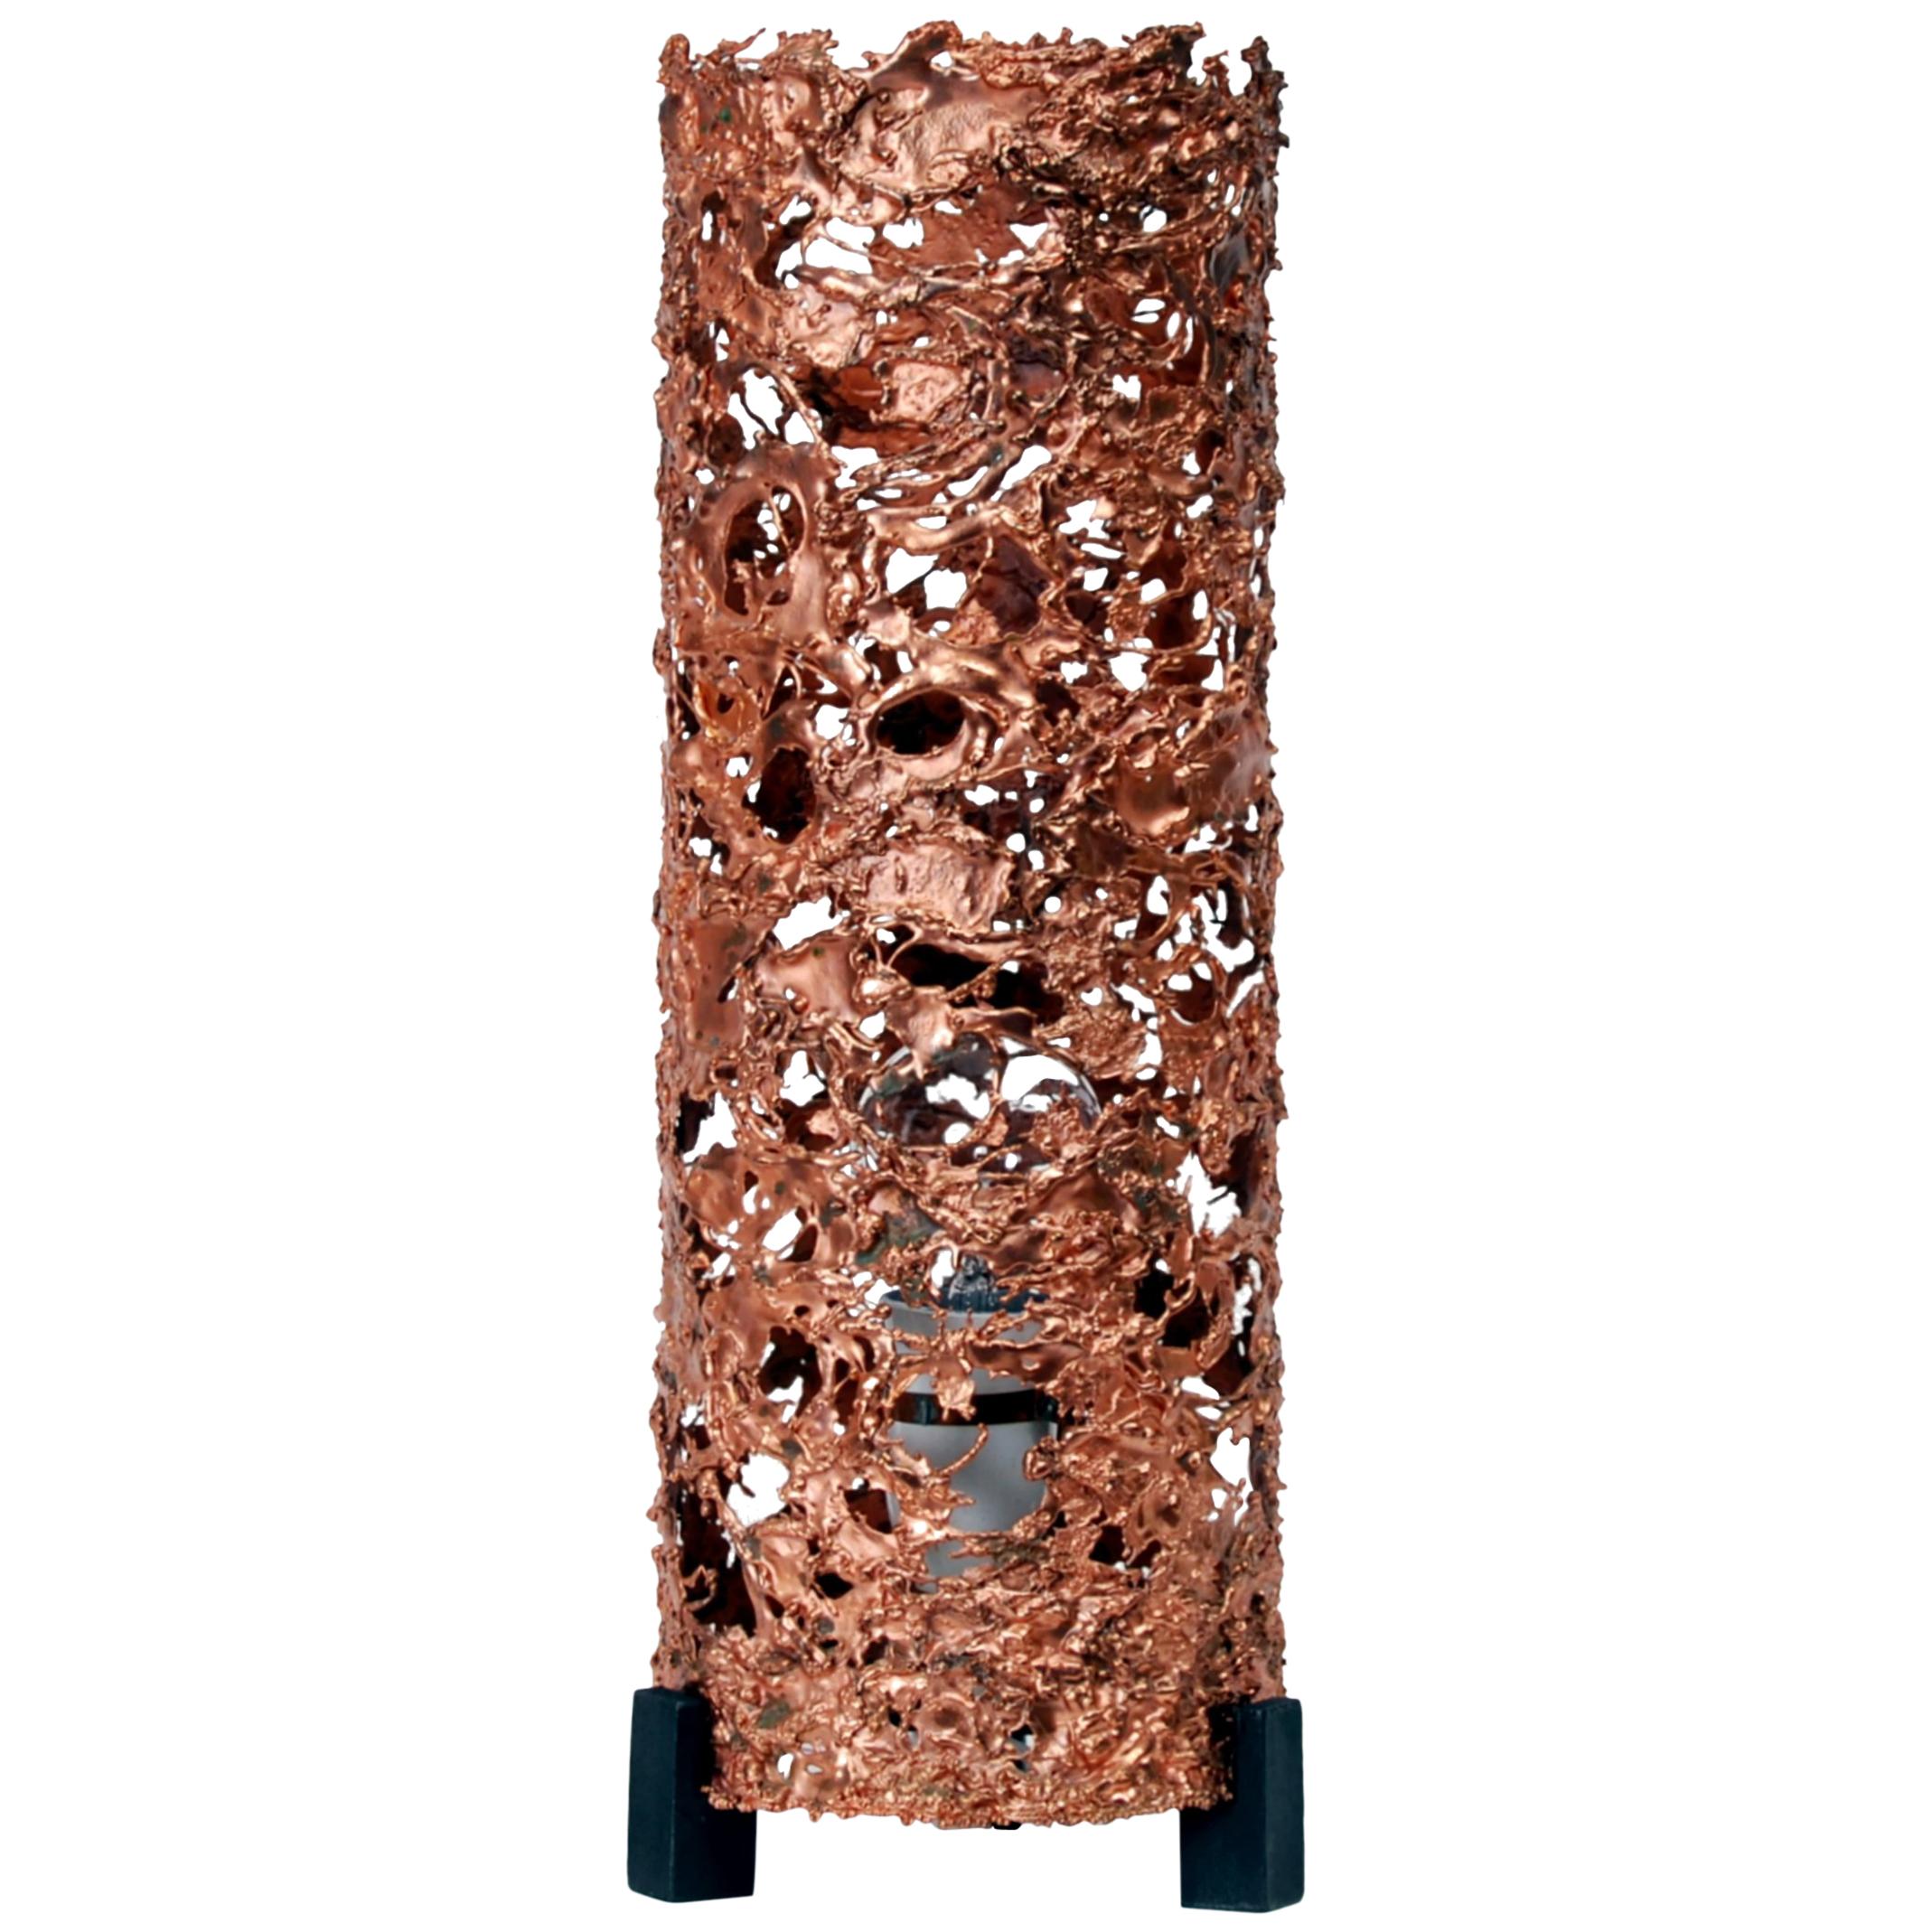 Finnish Designer Aimo Tukiainens Large Melted Copper Table Lamp, 1960s